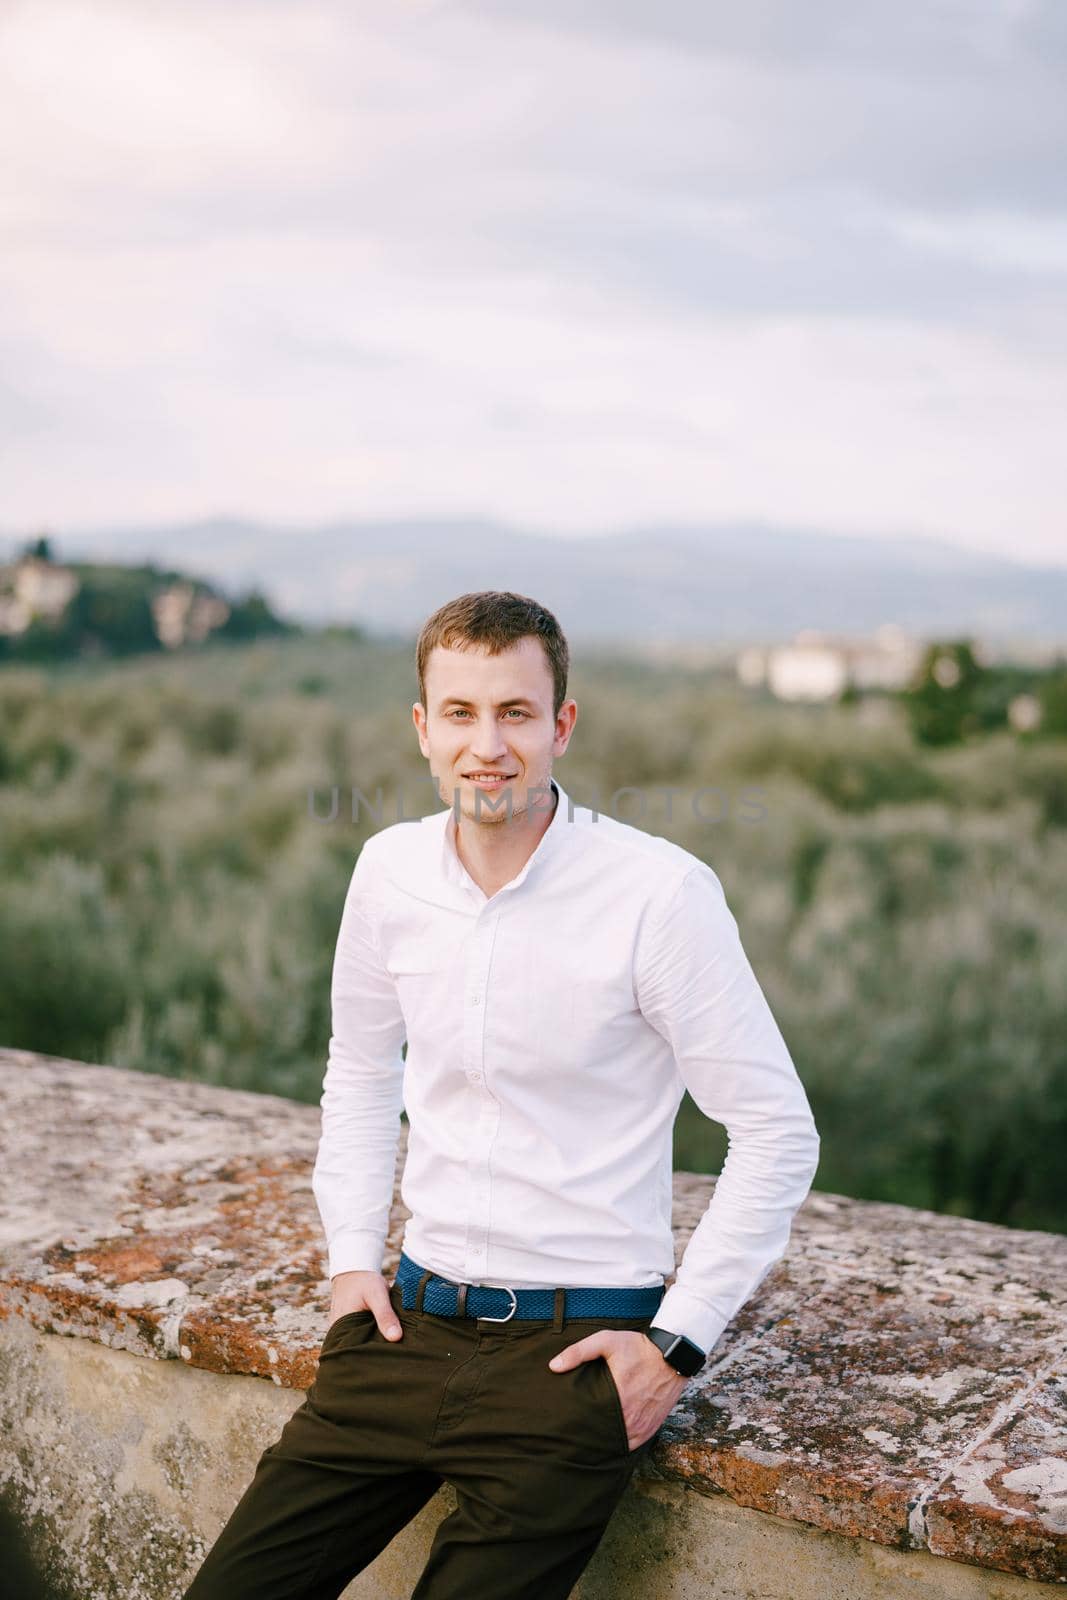 A large male portrait on the roof of an old winery villa in Tuscany, Italy. White long-sleeved shirt, smart watch, blue belt, hands in pants pockets.